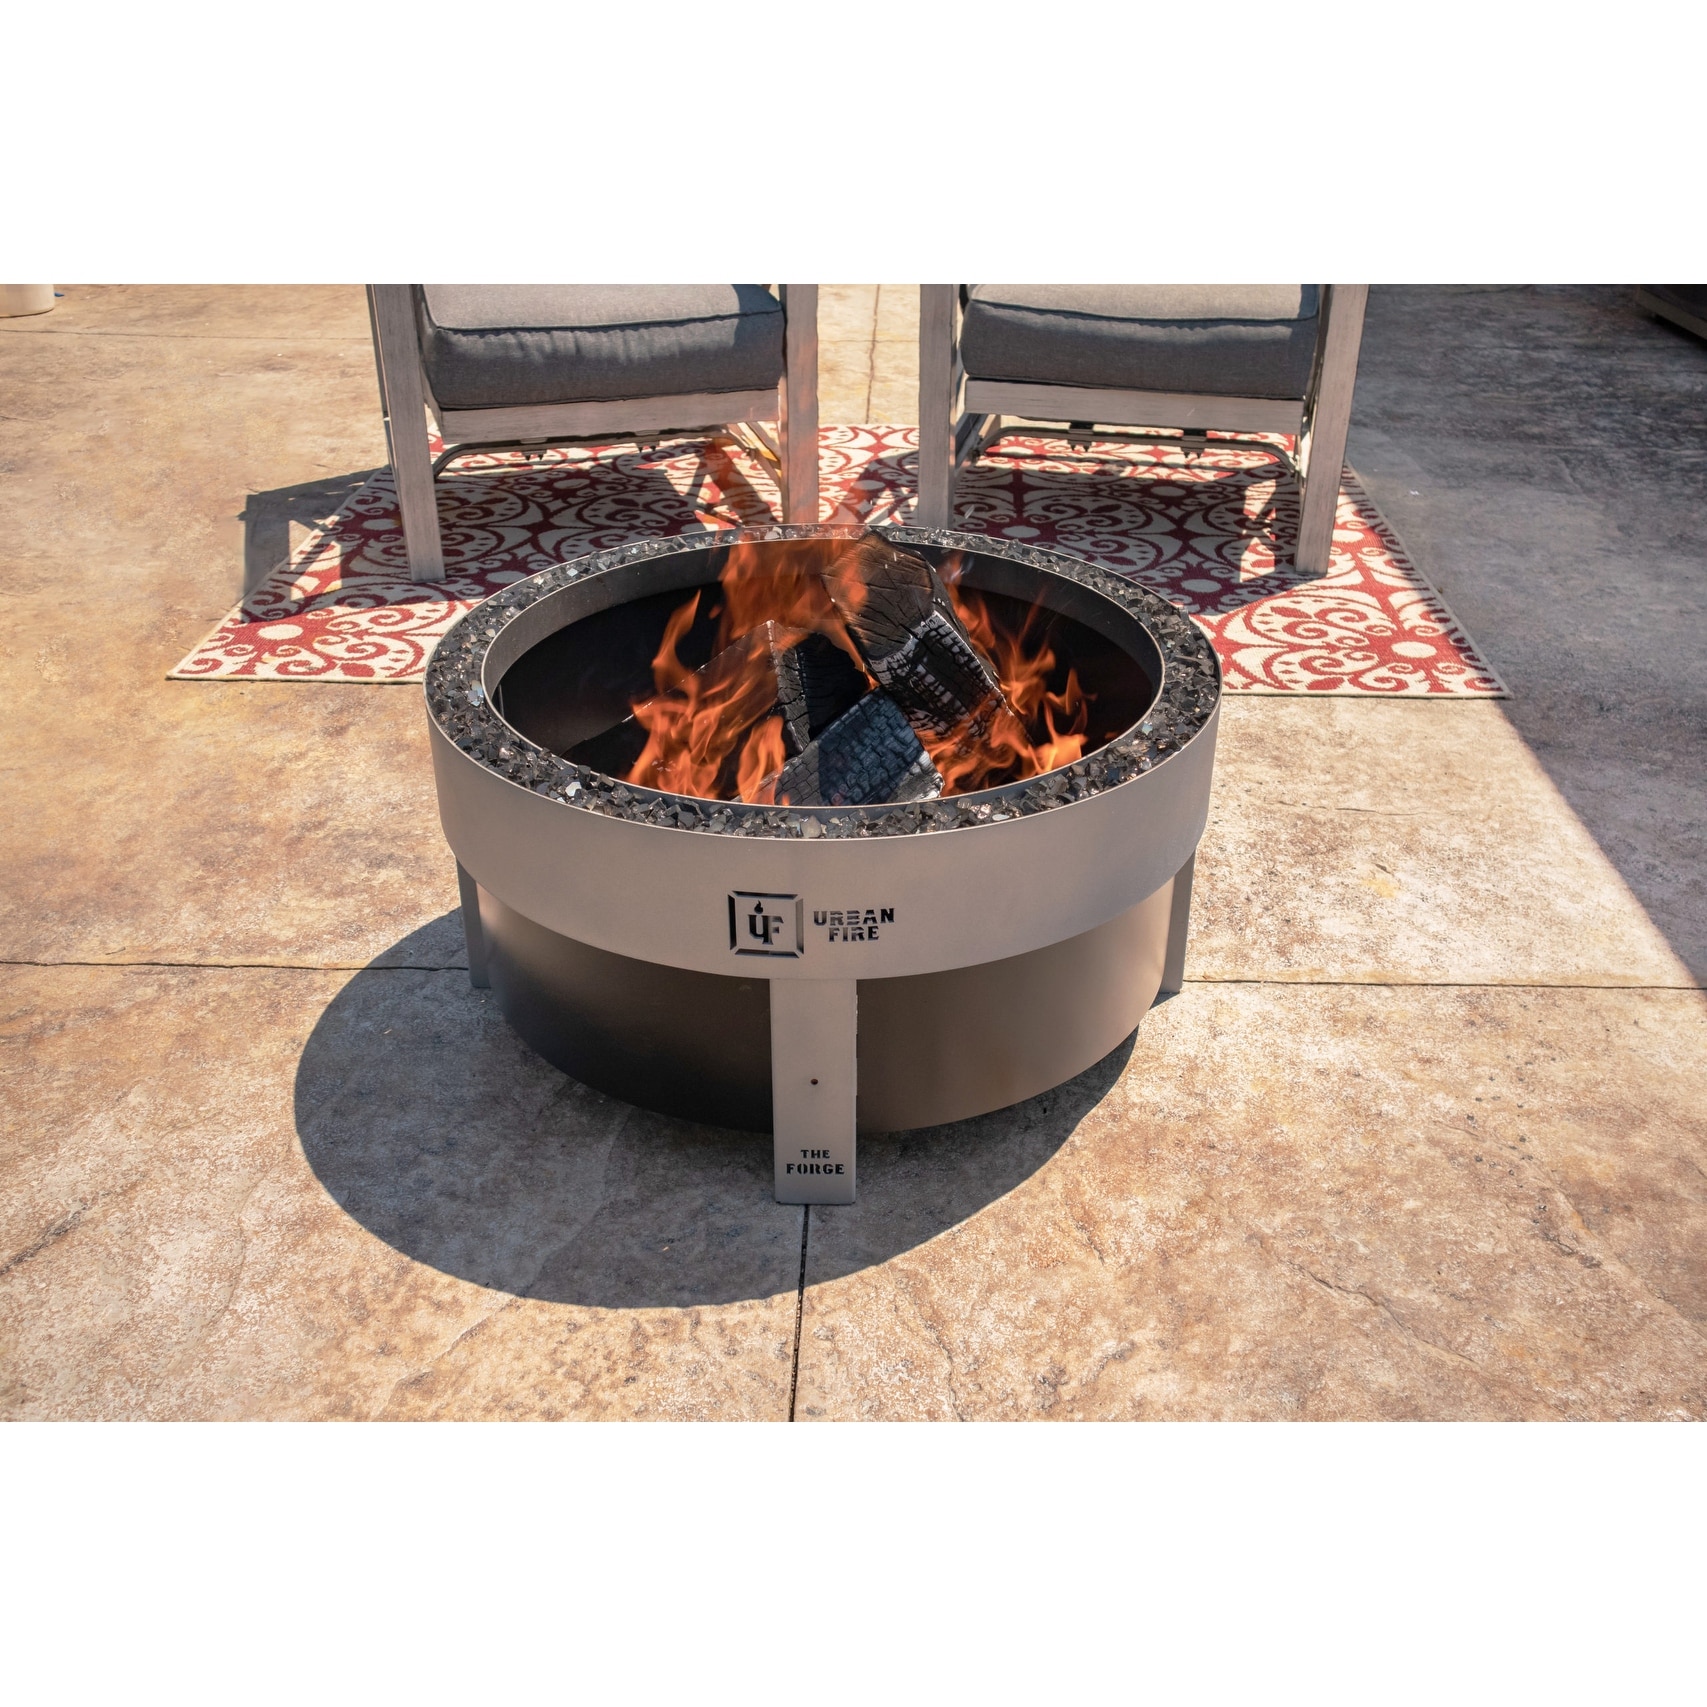 https://ak1.ostkcdn.com/images/products/is/images/direct/24018dd57e075cc42f409ad0c5ee3bada9df34db/The-Forge-Smokeless-Fire-Pit.jpg